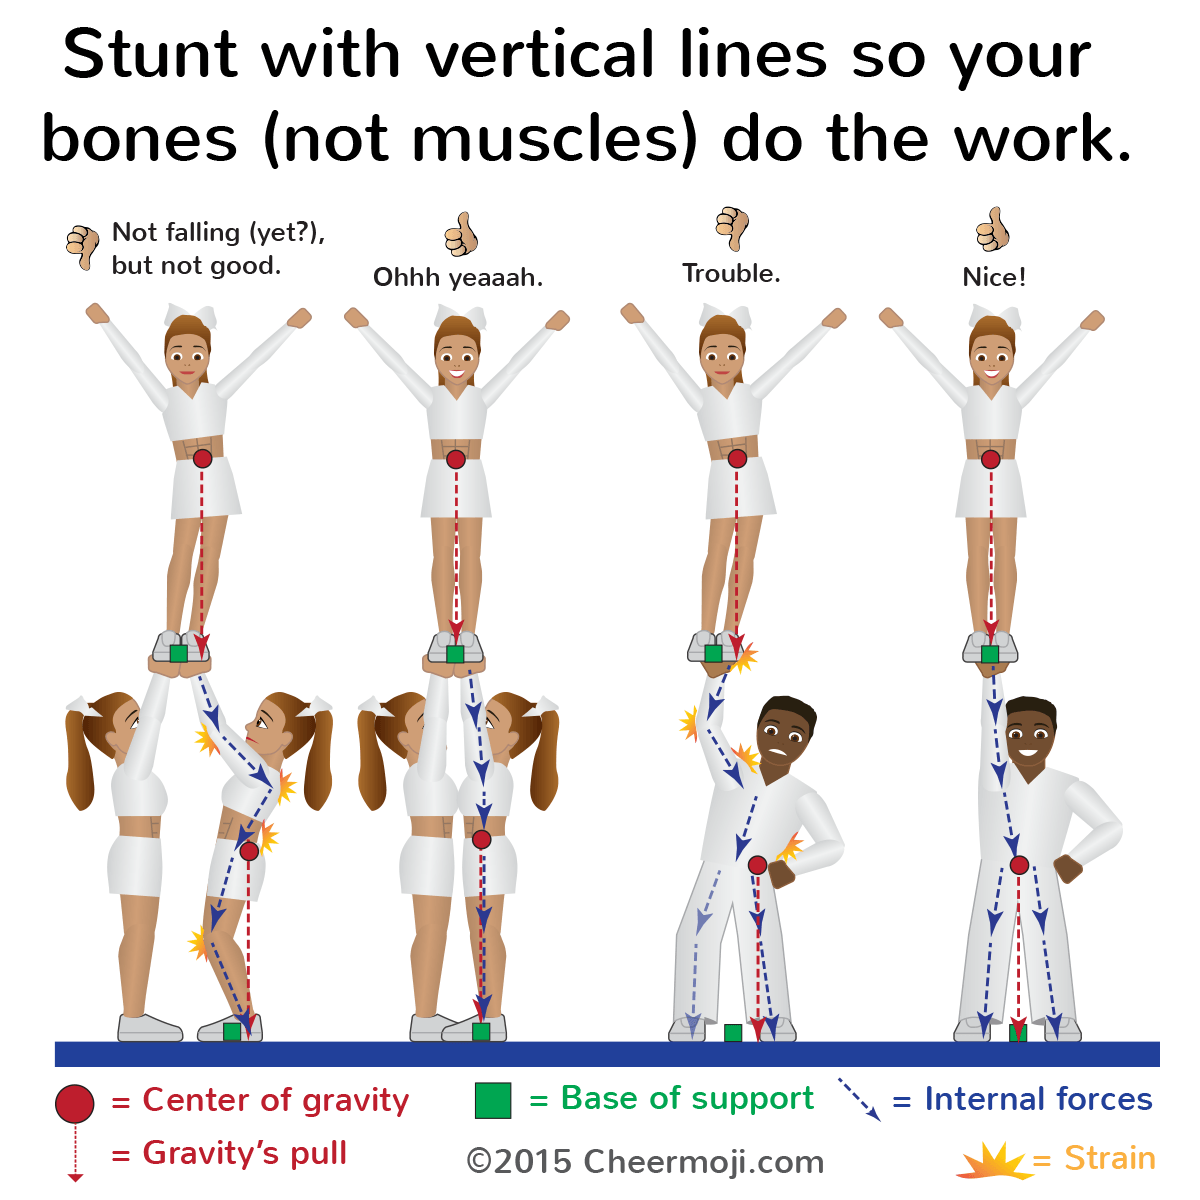 Stunt with vertical lines so your bones, not muscles, do the work.